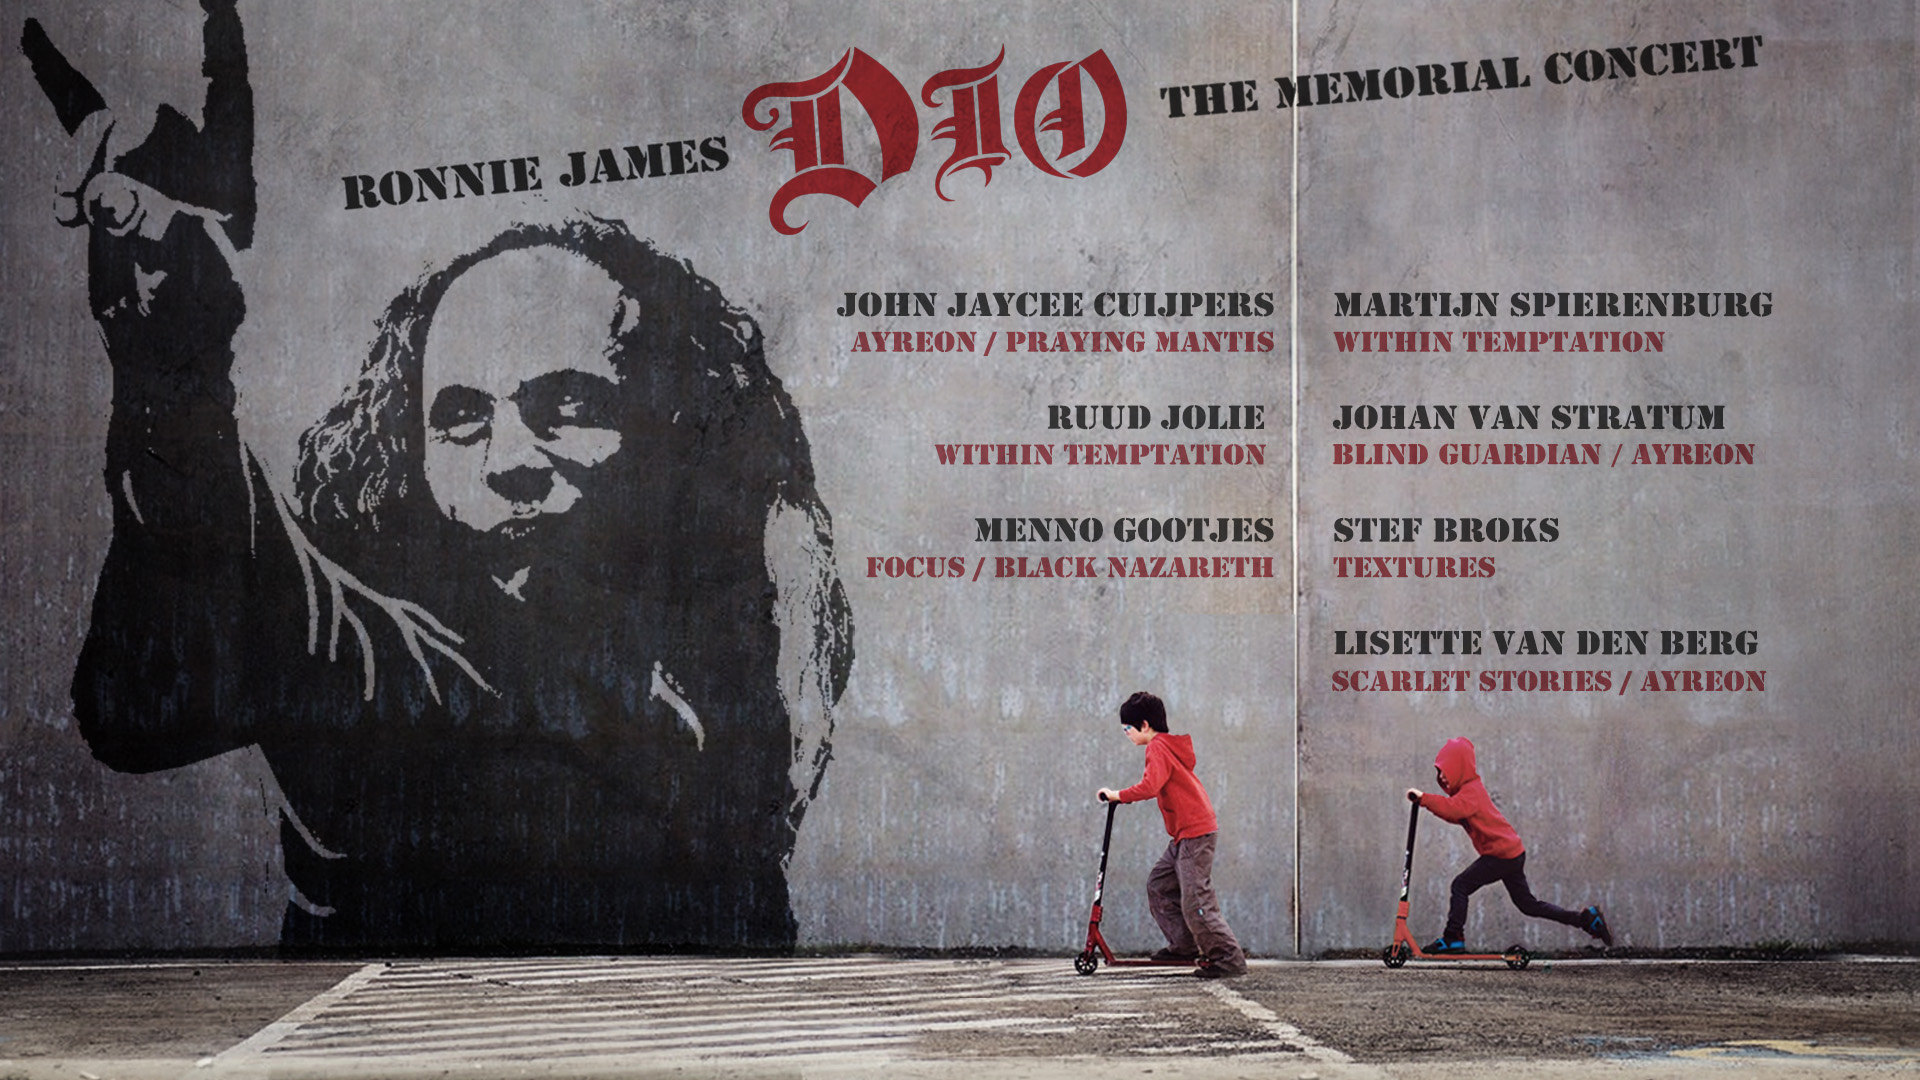 Ronnie James Dio – The Memorial Concert